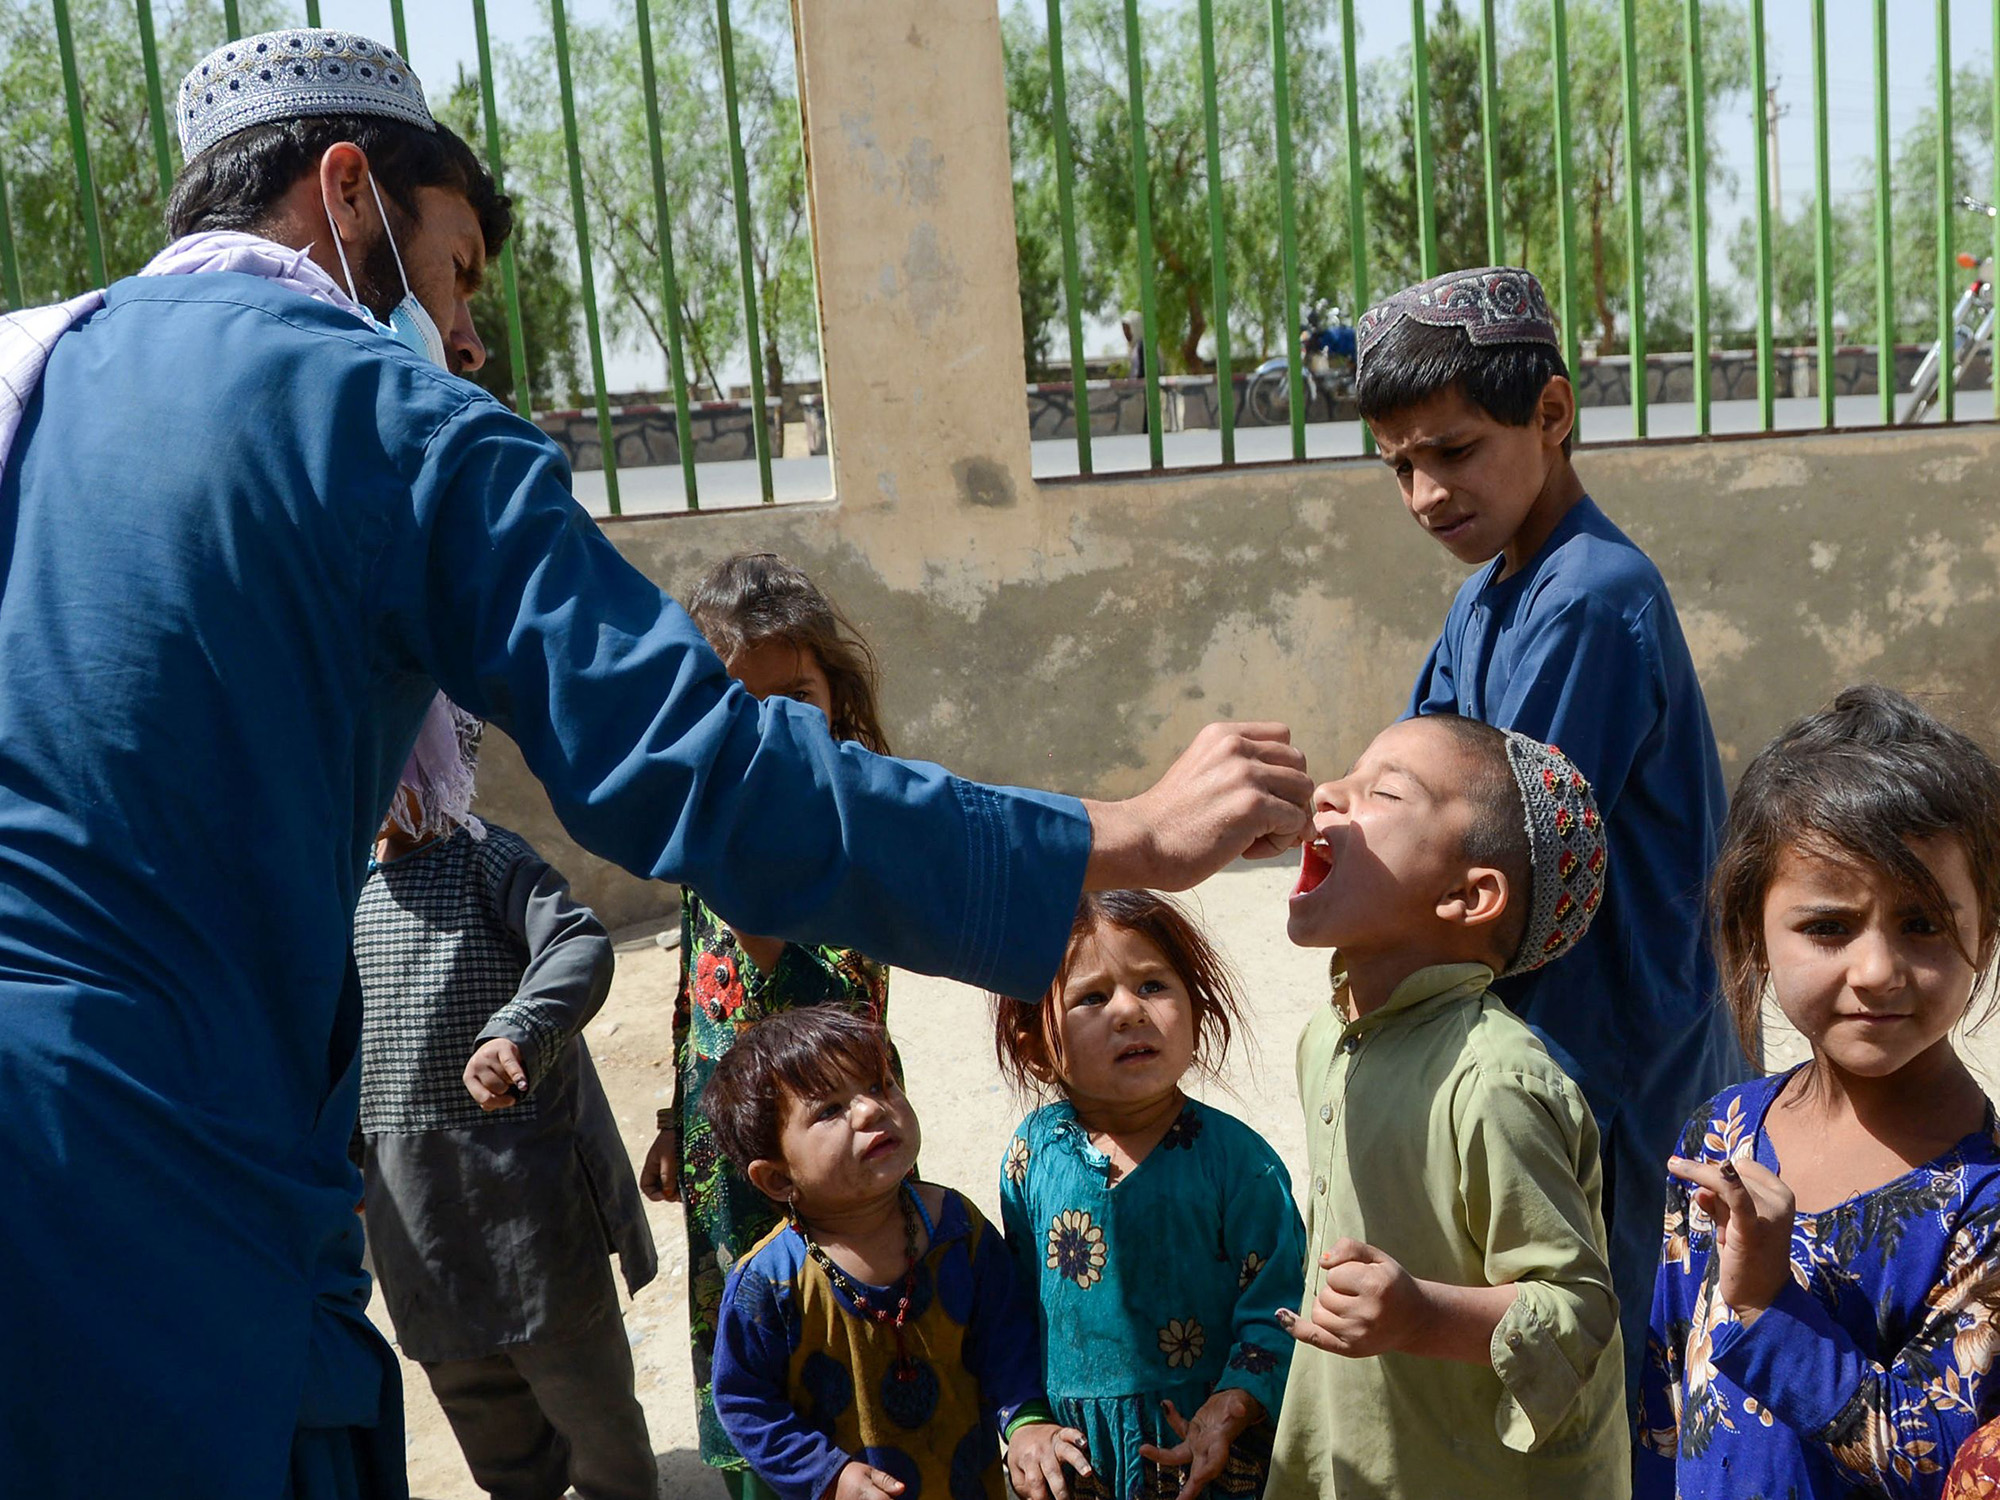 Eradicating Polio Will Require Changing the Current Public Health Strategy